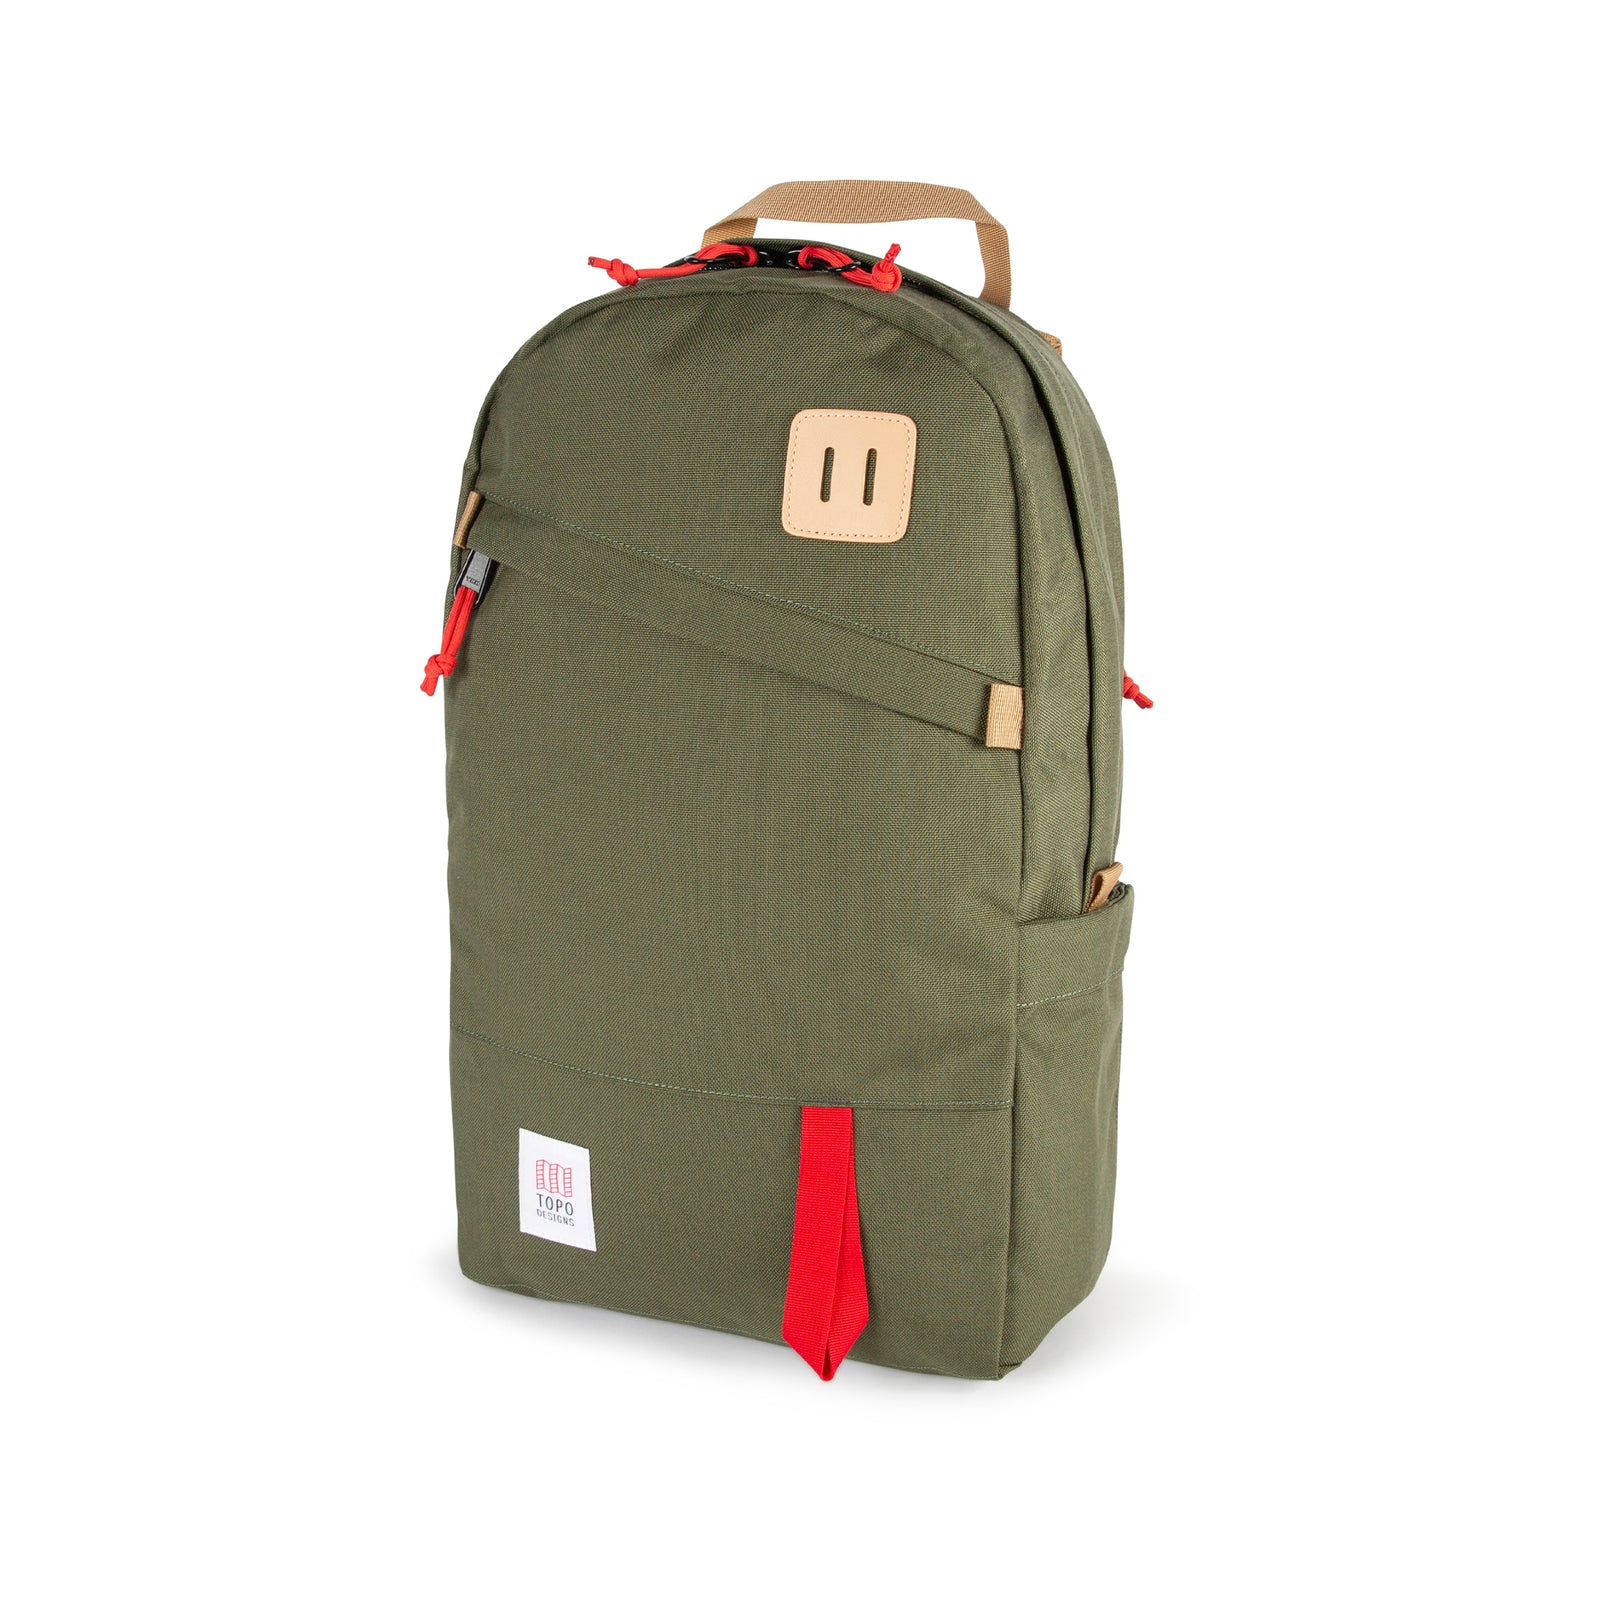 Topo Designs Daypack Classic 100% recycled nylon laptop backpack for work or school in "Olive / Red" green.